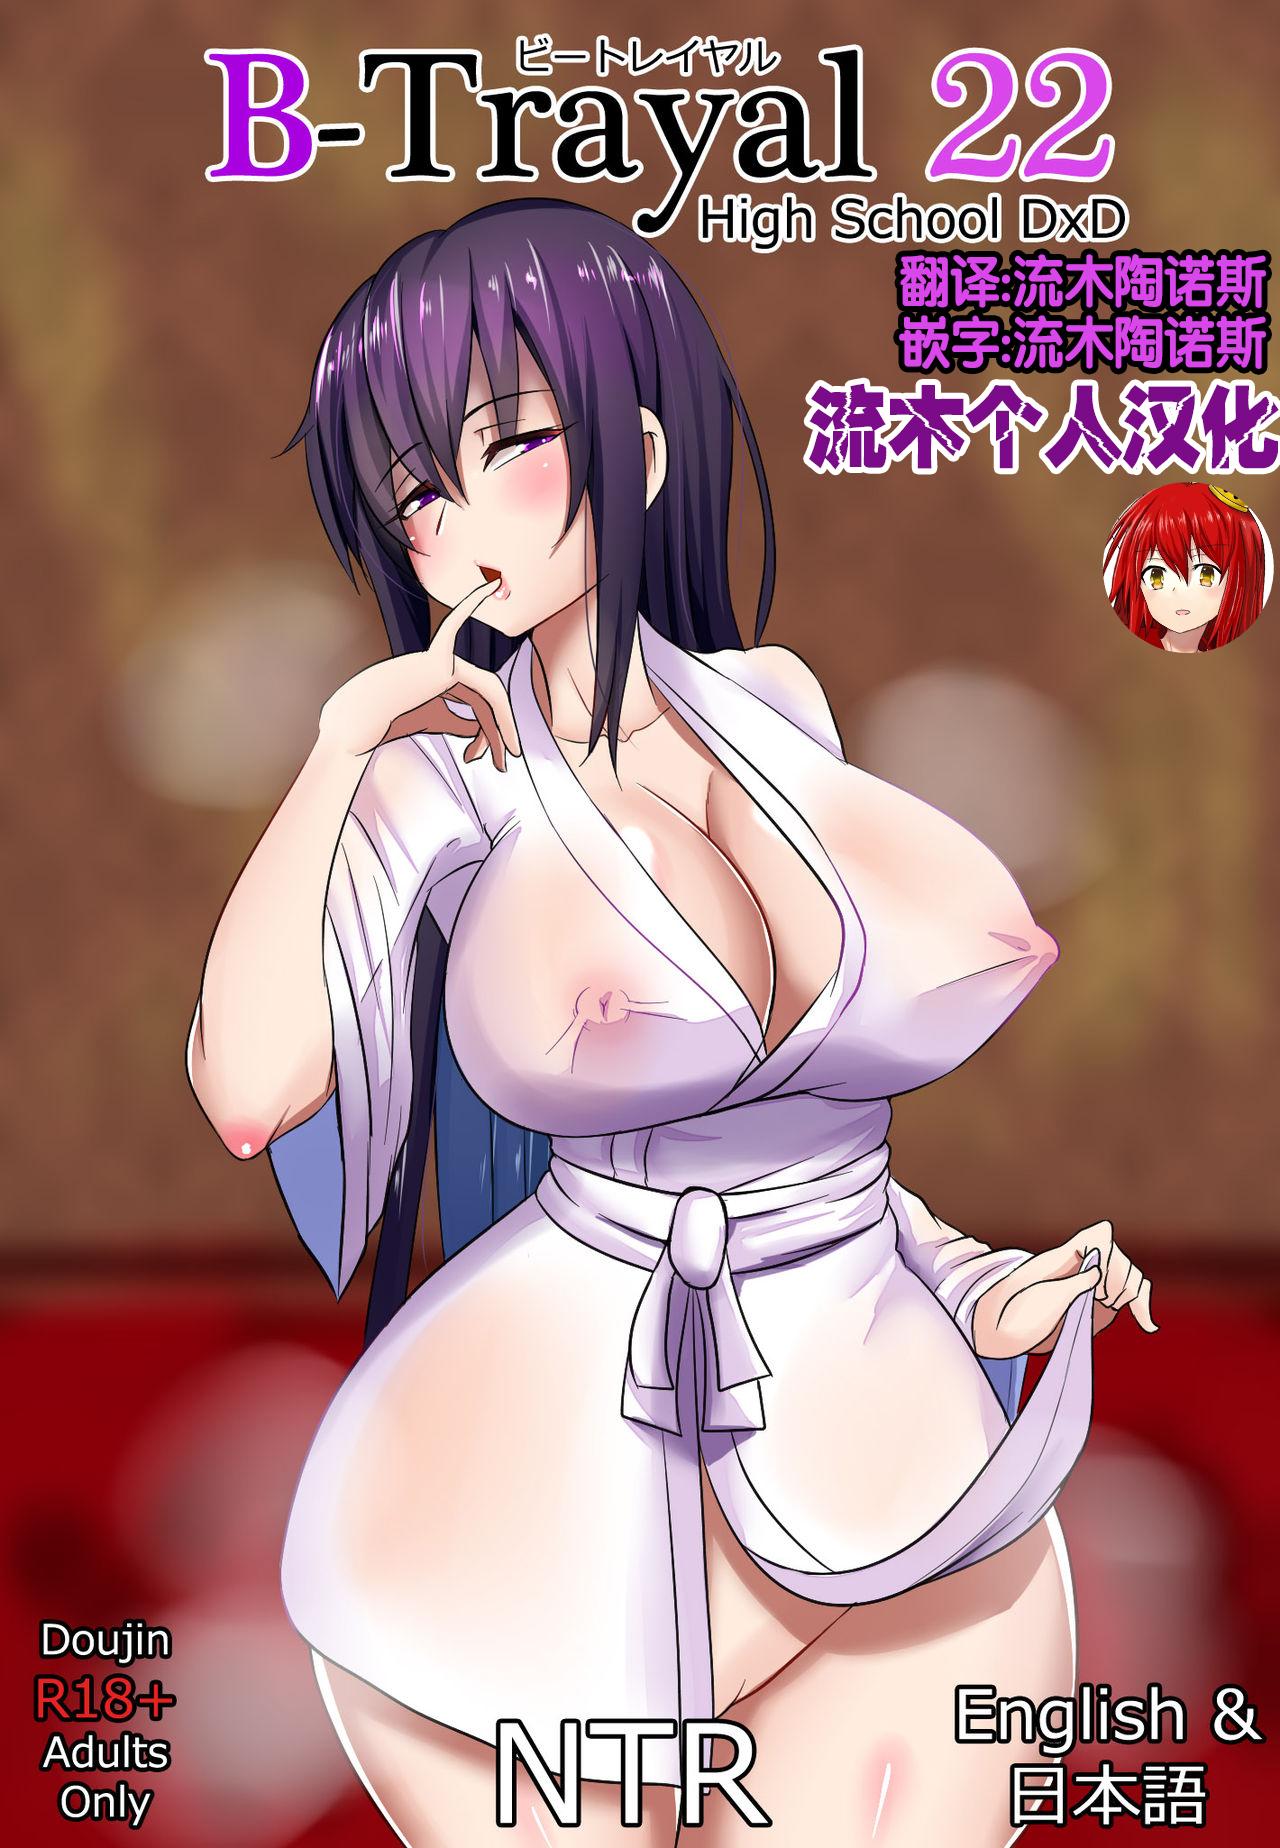 Indonesian B-TRAYAL 22 Akeno - Highschool dxd Cock - Picture 1